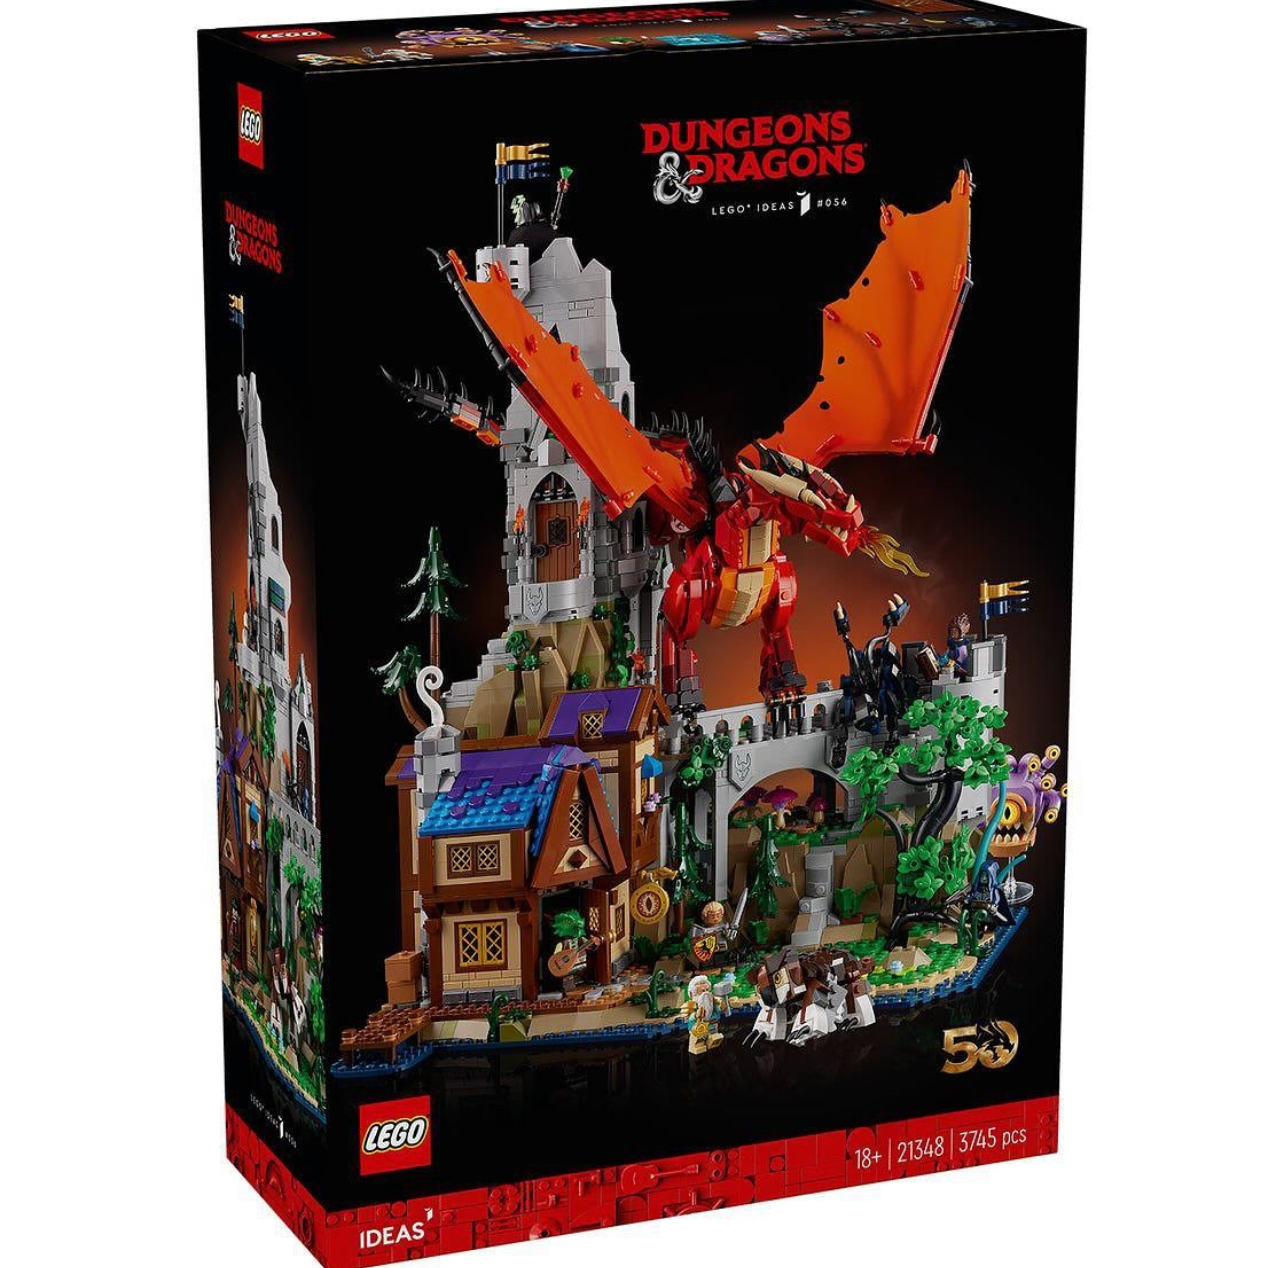 LEGO 71047 Dungeons & Dragons Collectible Minifigures!